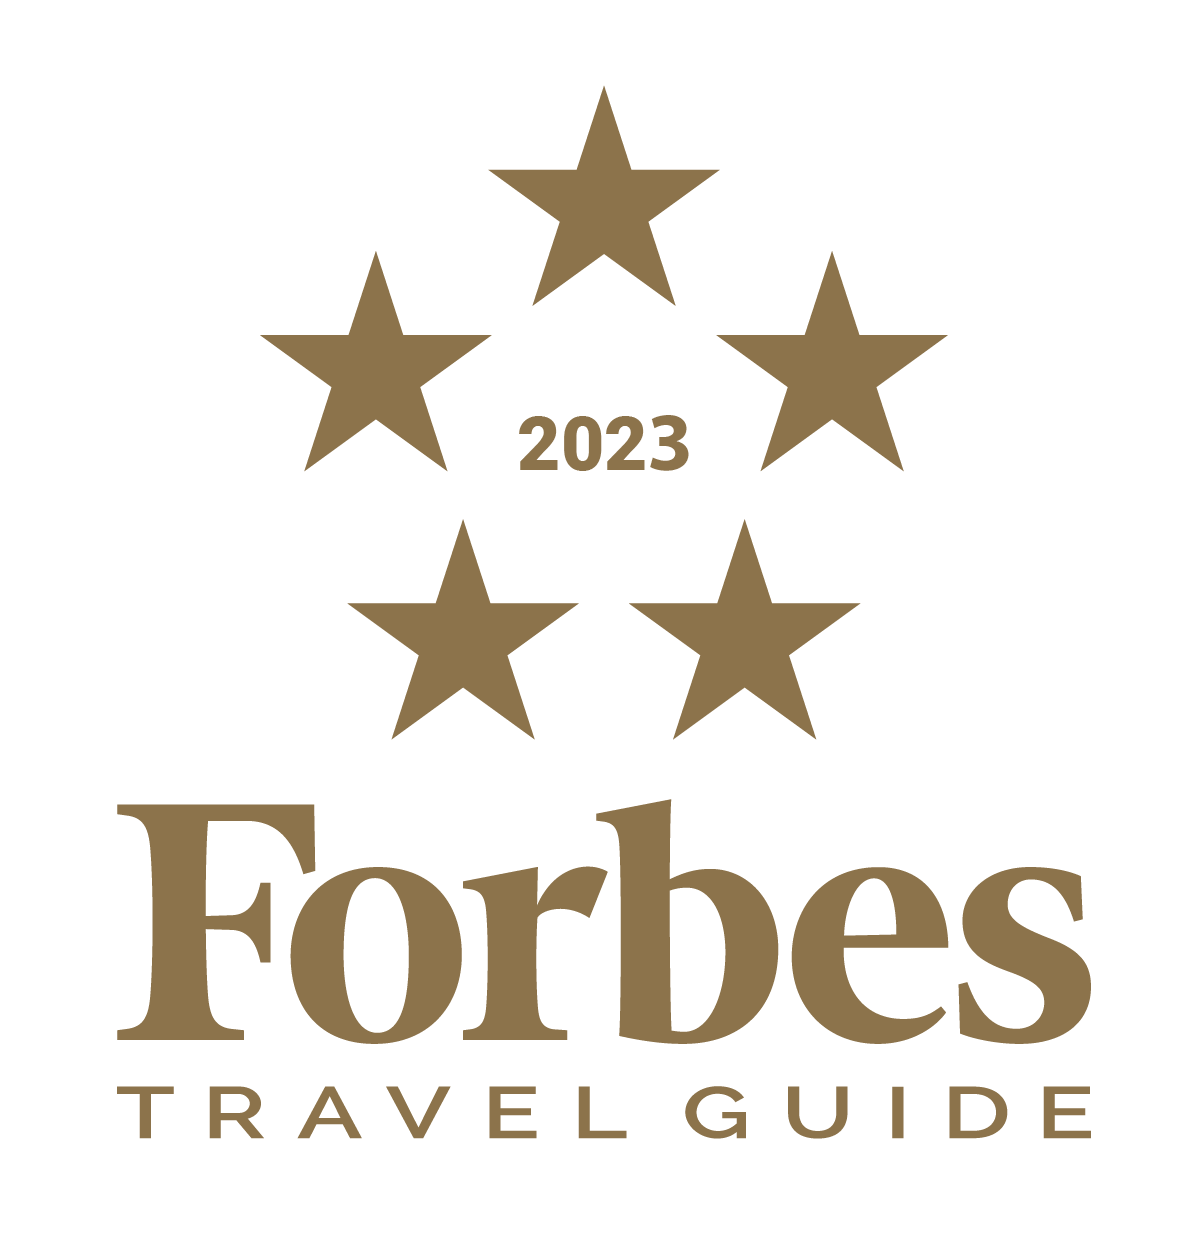 Forbes Travel Guide 2023 logo